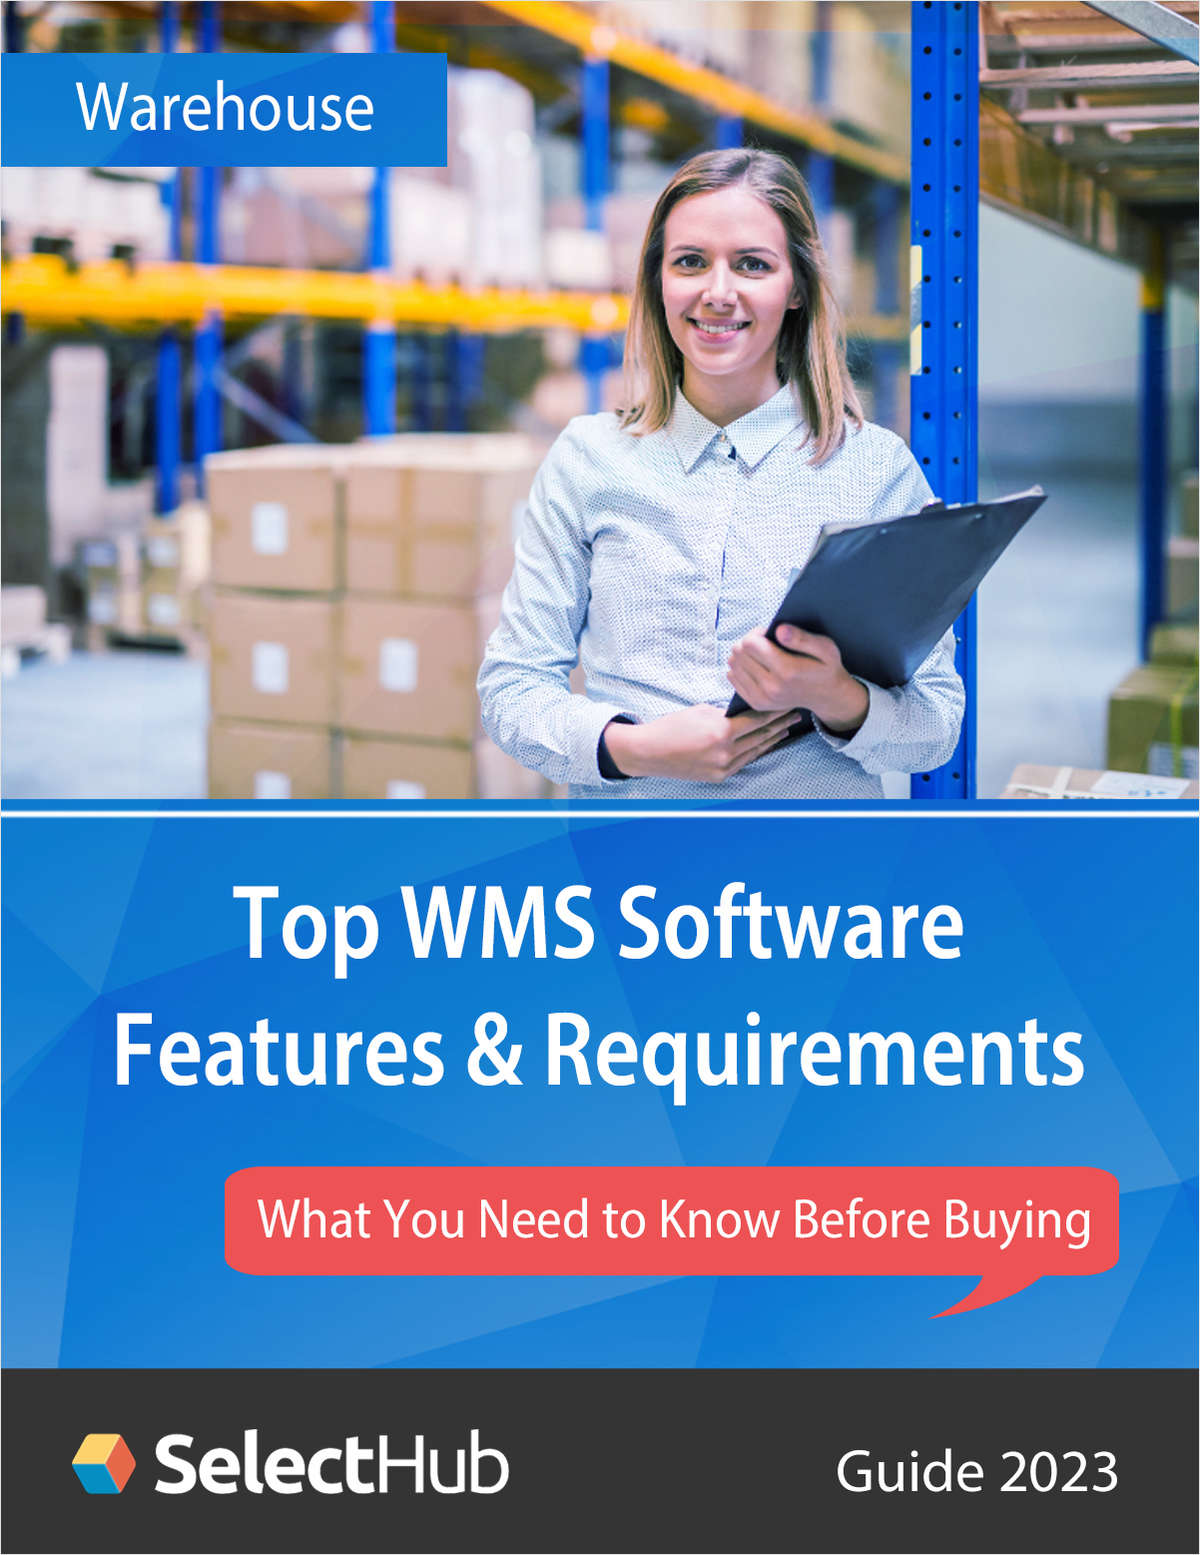 Top WMS Software Features & RequirementsWhat You Need to Know Before